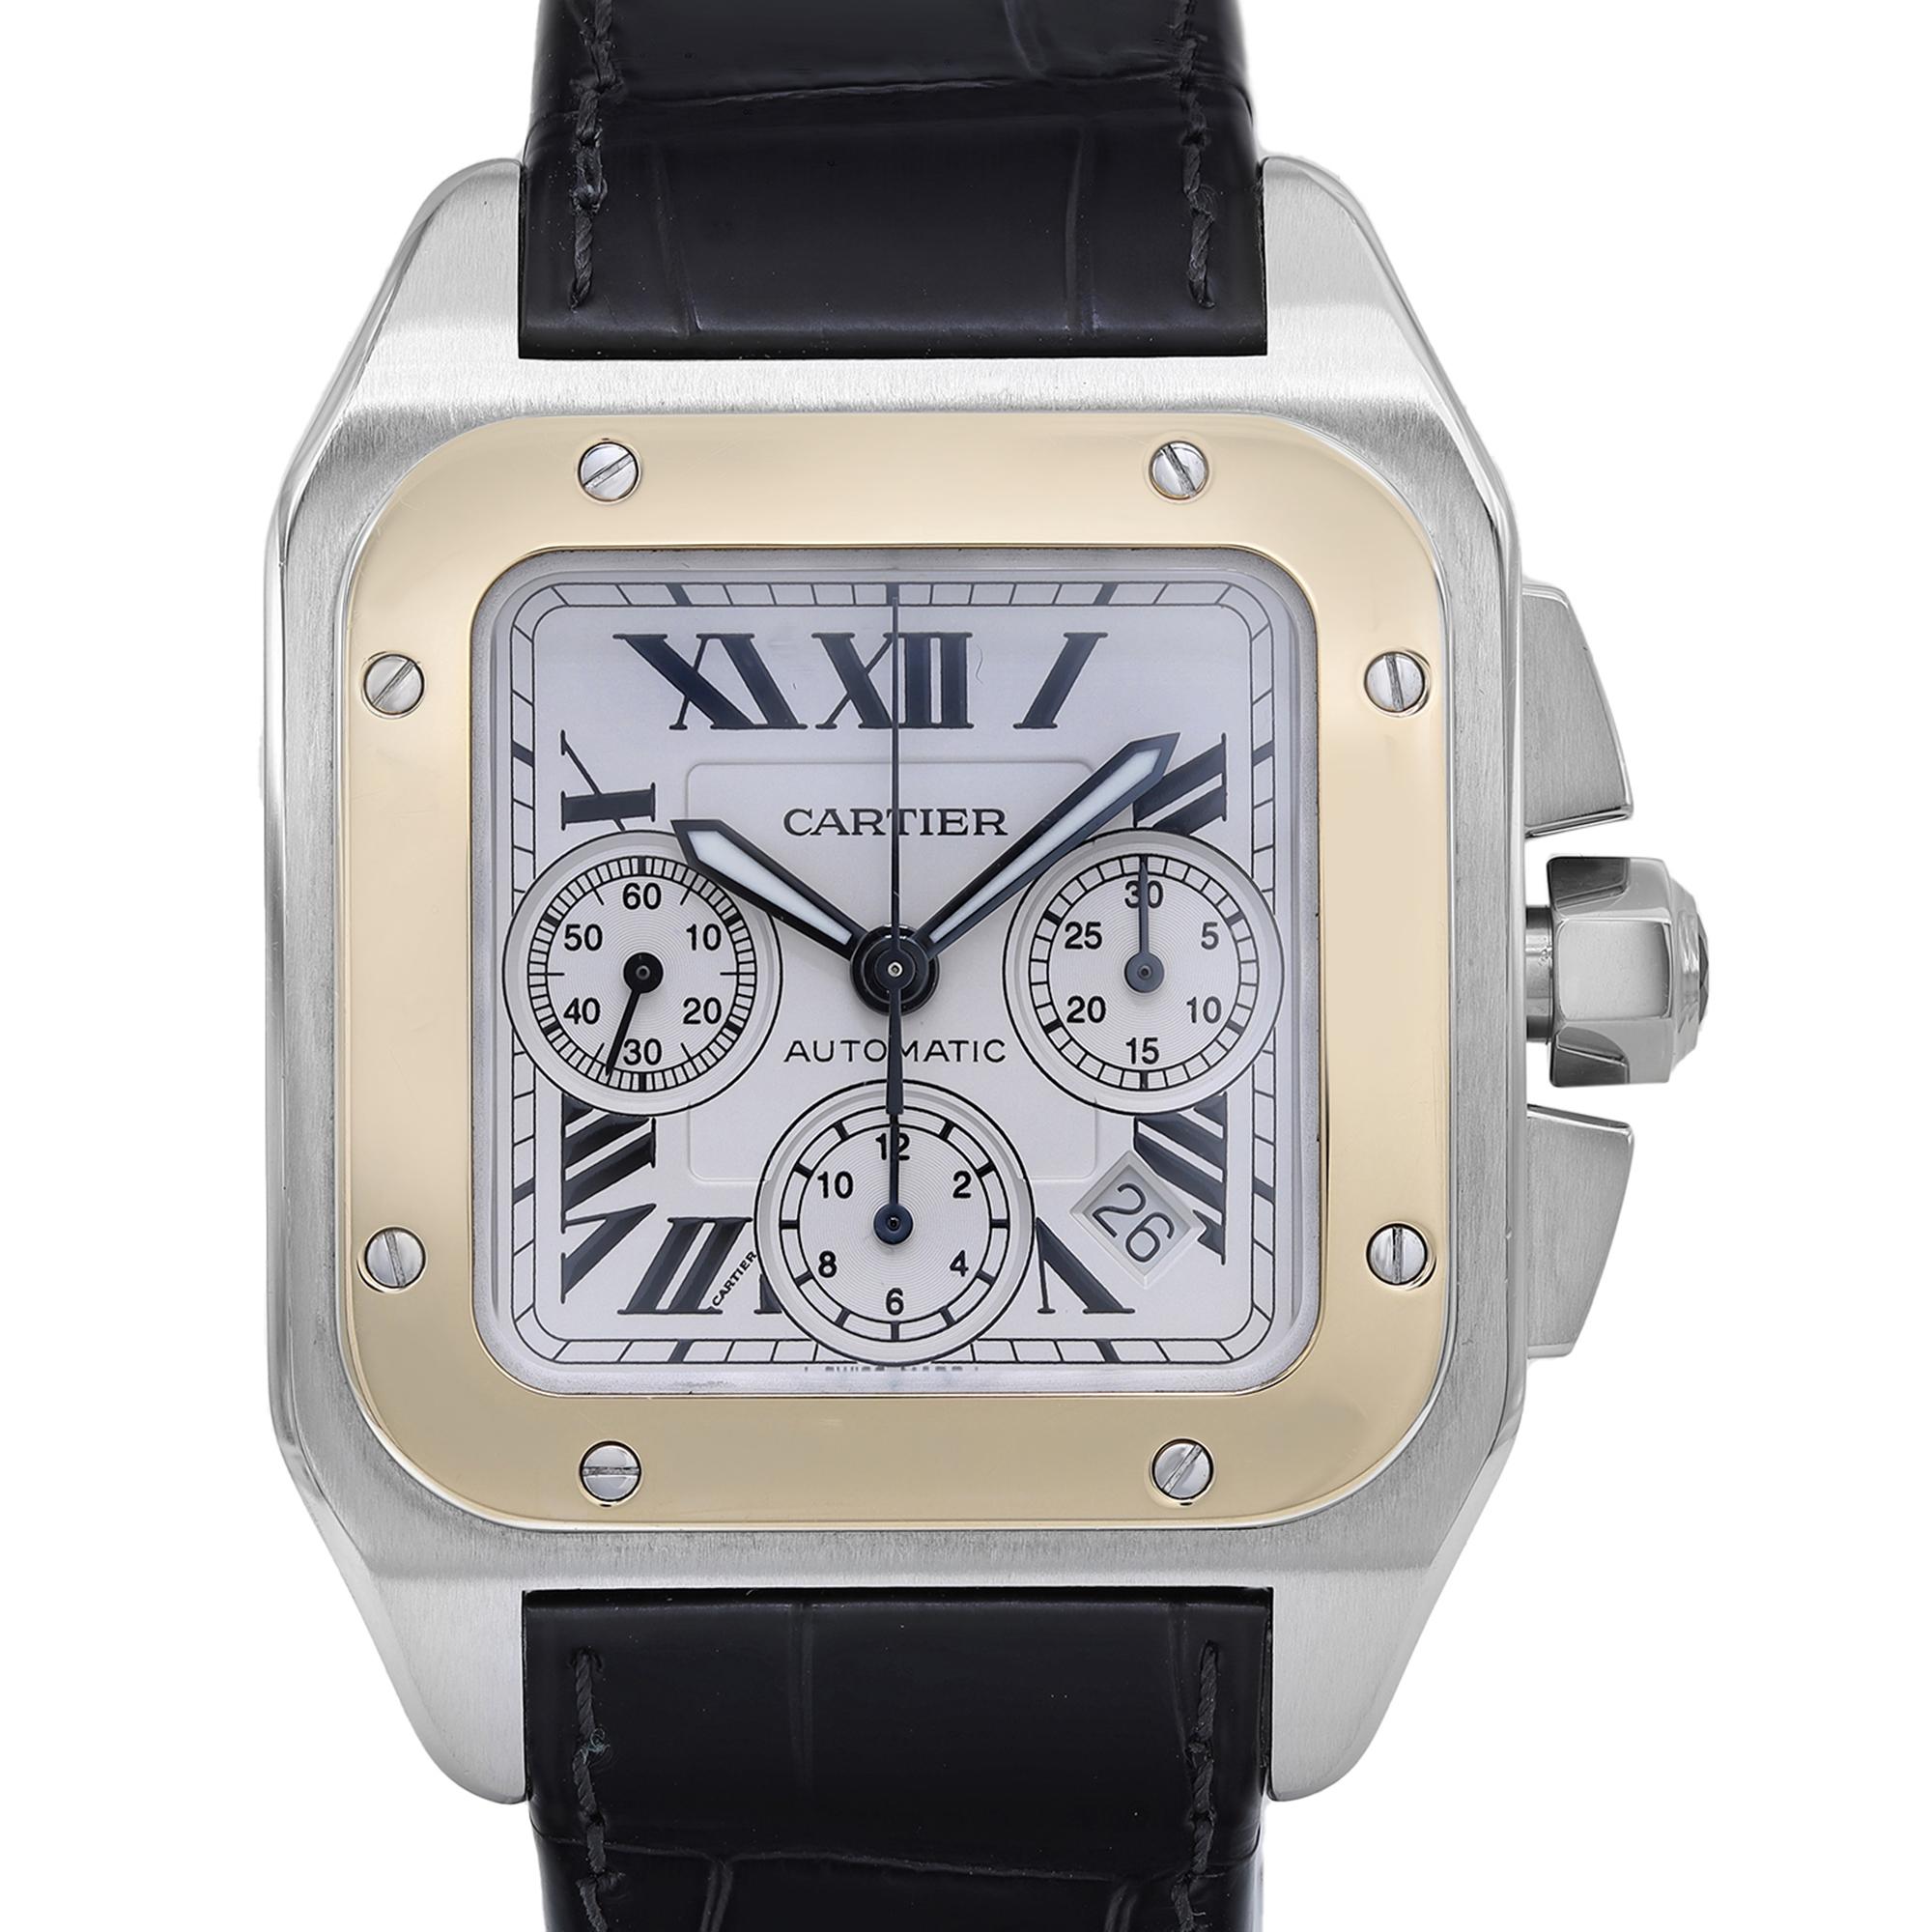 Pre-owned Cartier Santos 100 Men's Automatic Watch W20091X7. The leather band of this watch is brand new. Comes with the seller's Box and the seller's Authenticity Card. Covered by a 3-year Chronostore Warranty.

Brand: Cartier  Type: Wristwatch 